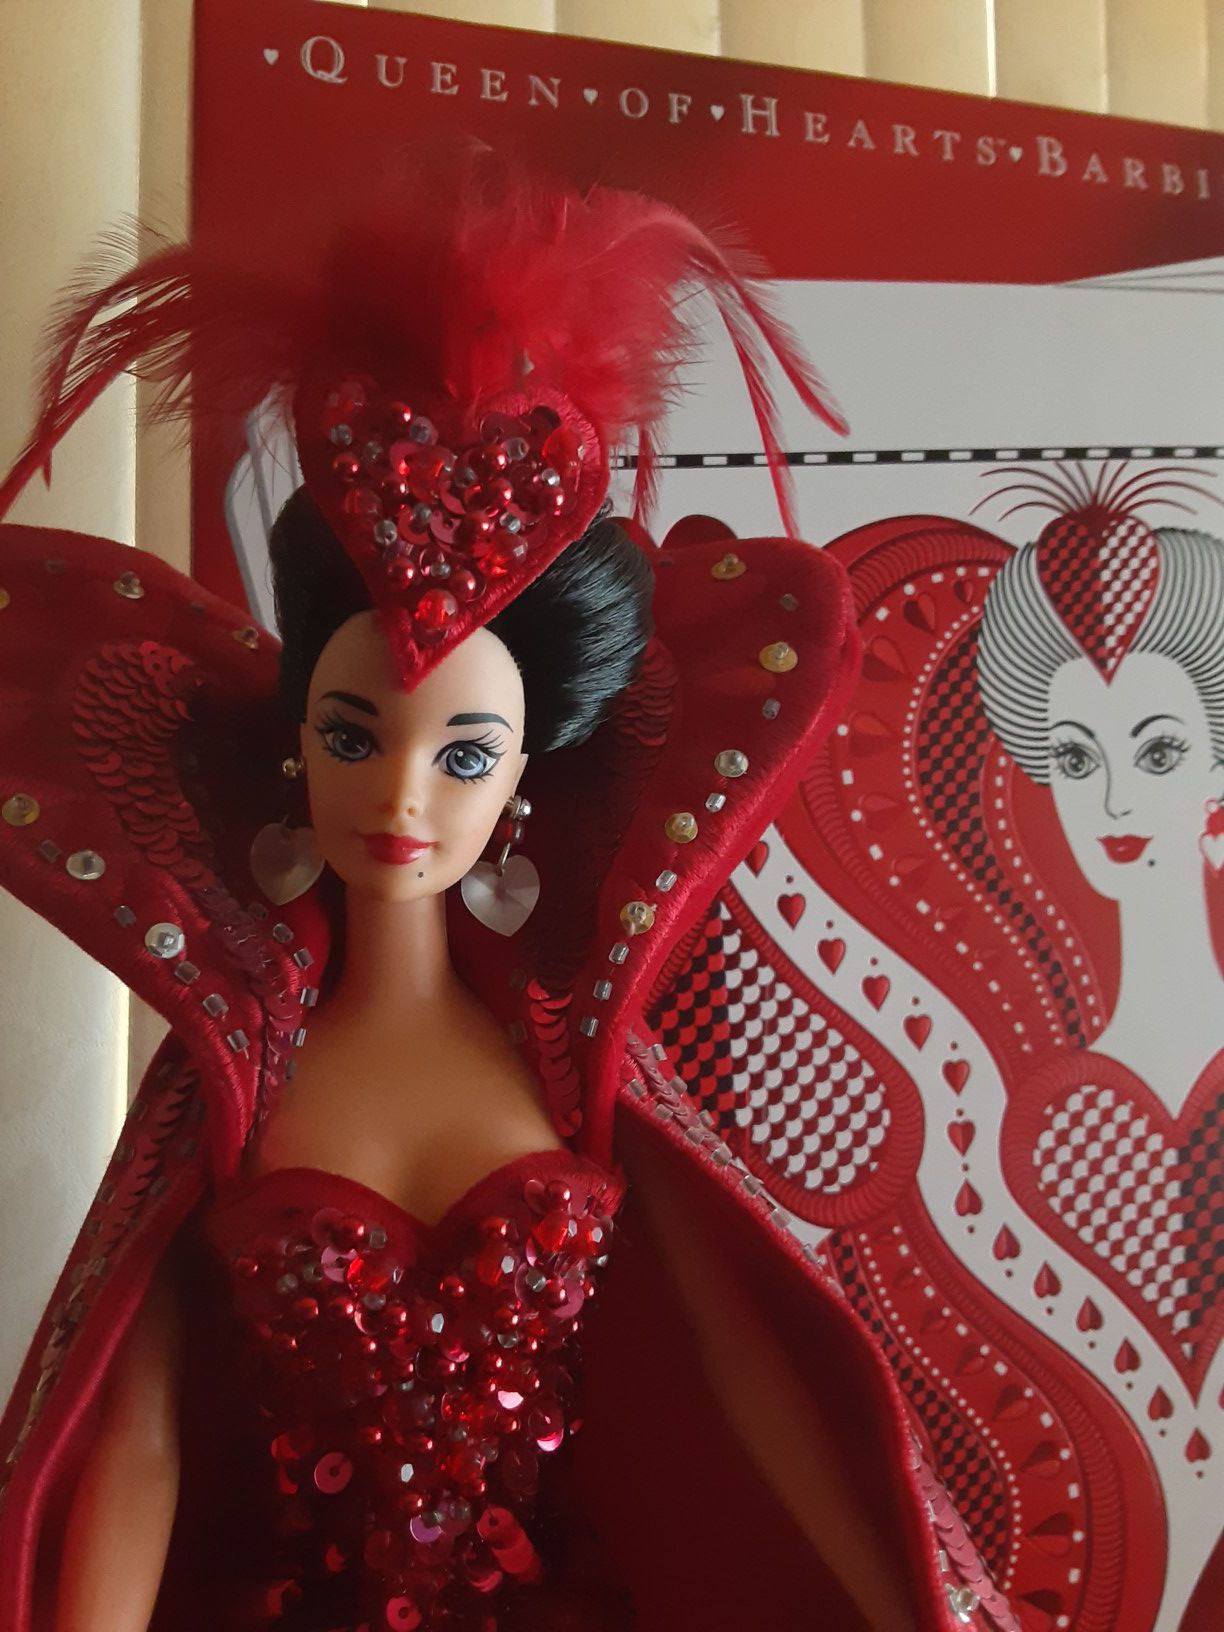 QUEEN OF HEARTS BARBIE DOLL 1994 BOB MACKIE